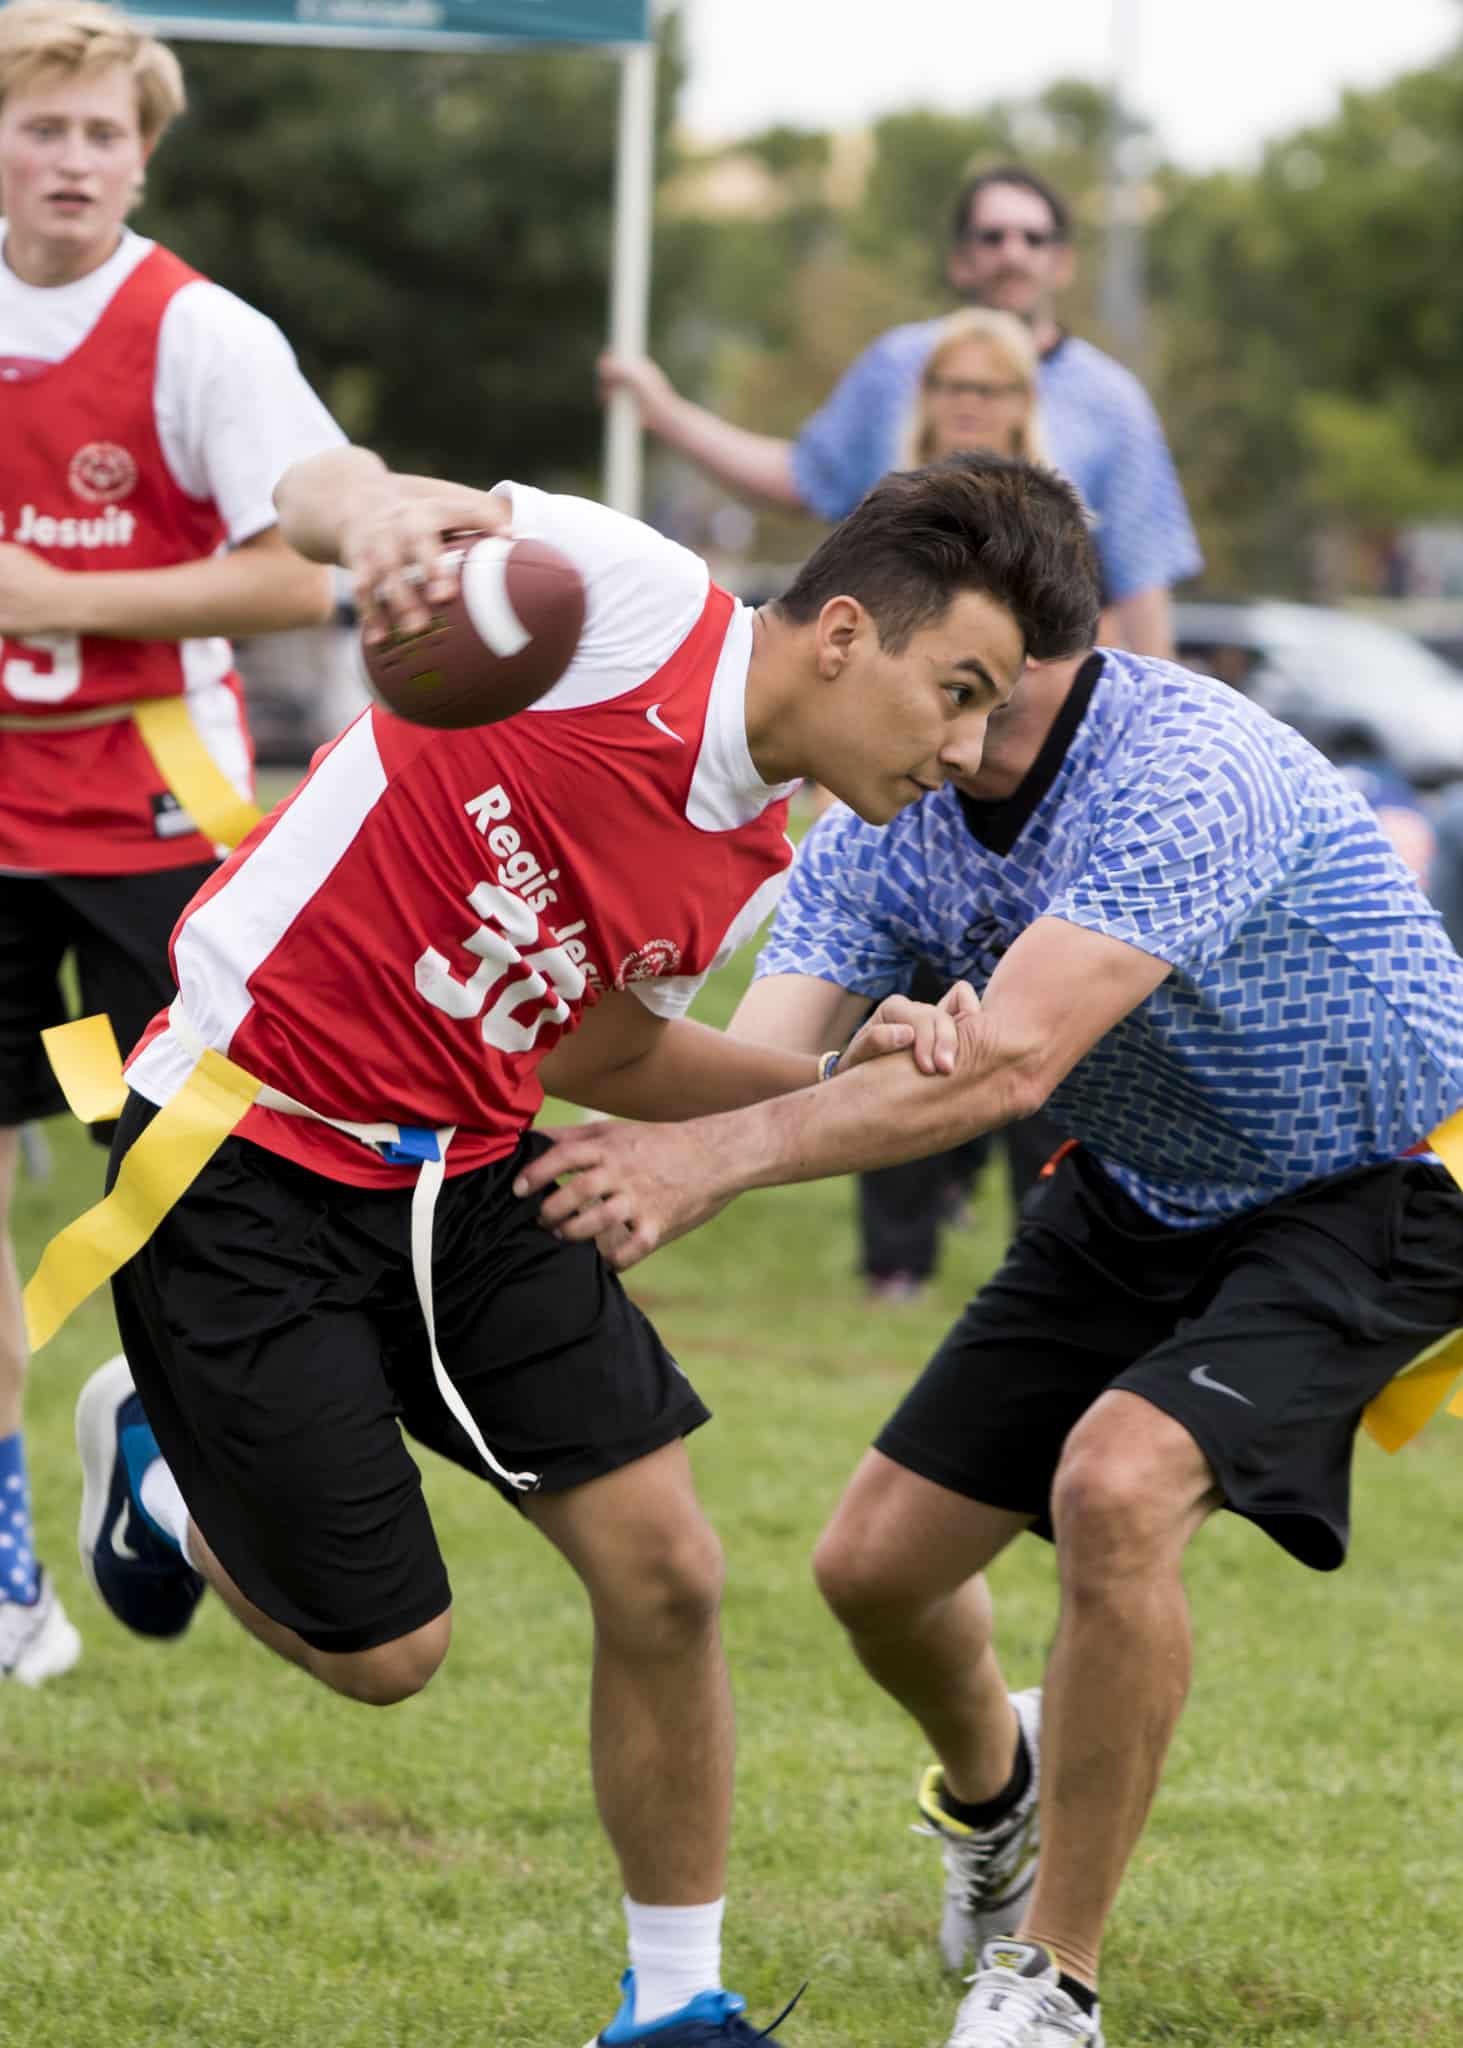 Action photo of flag football players